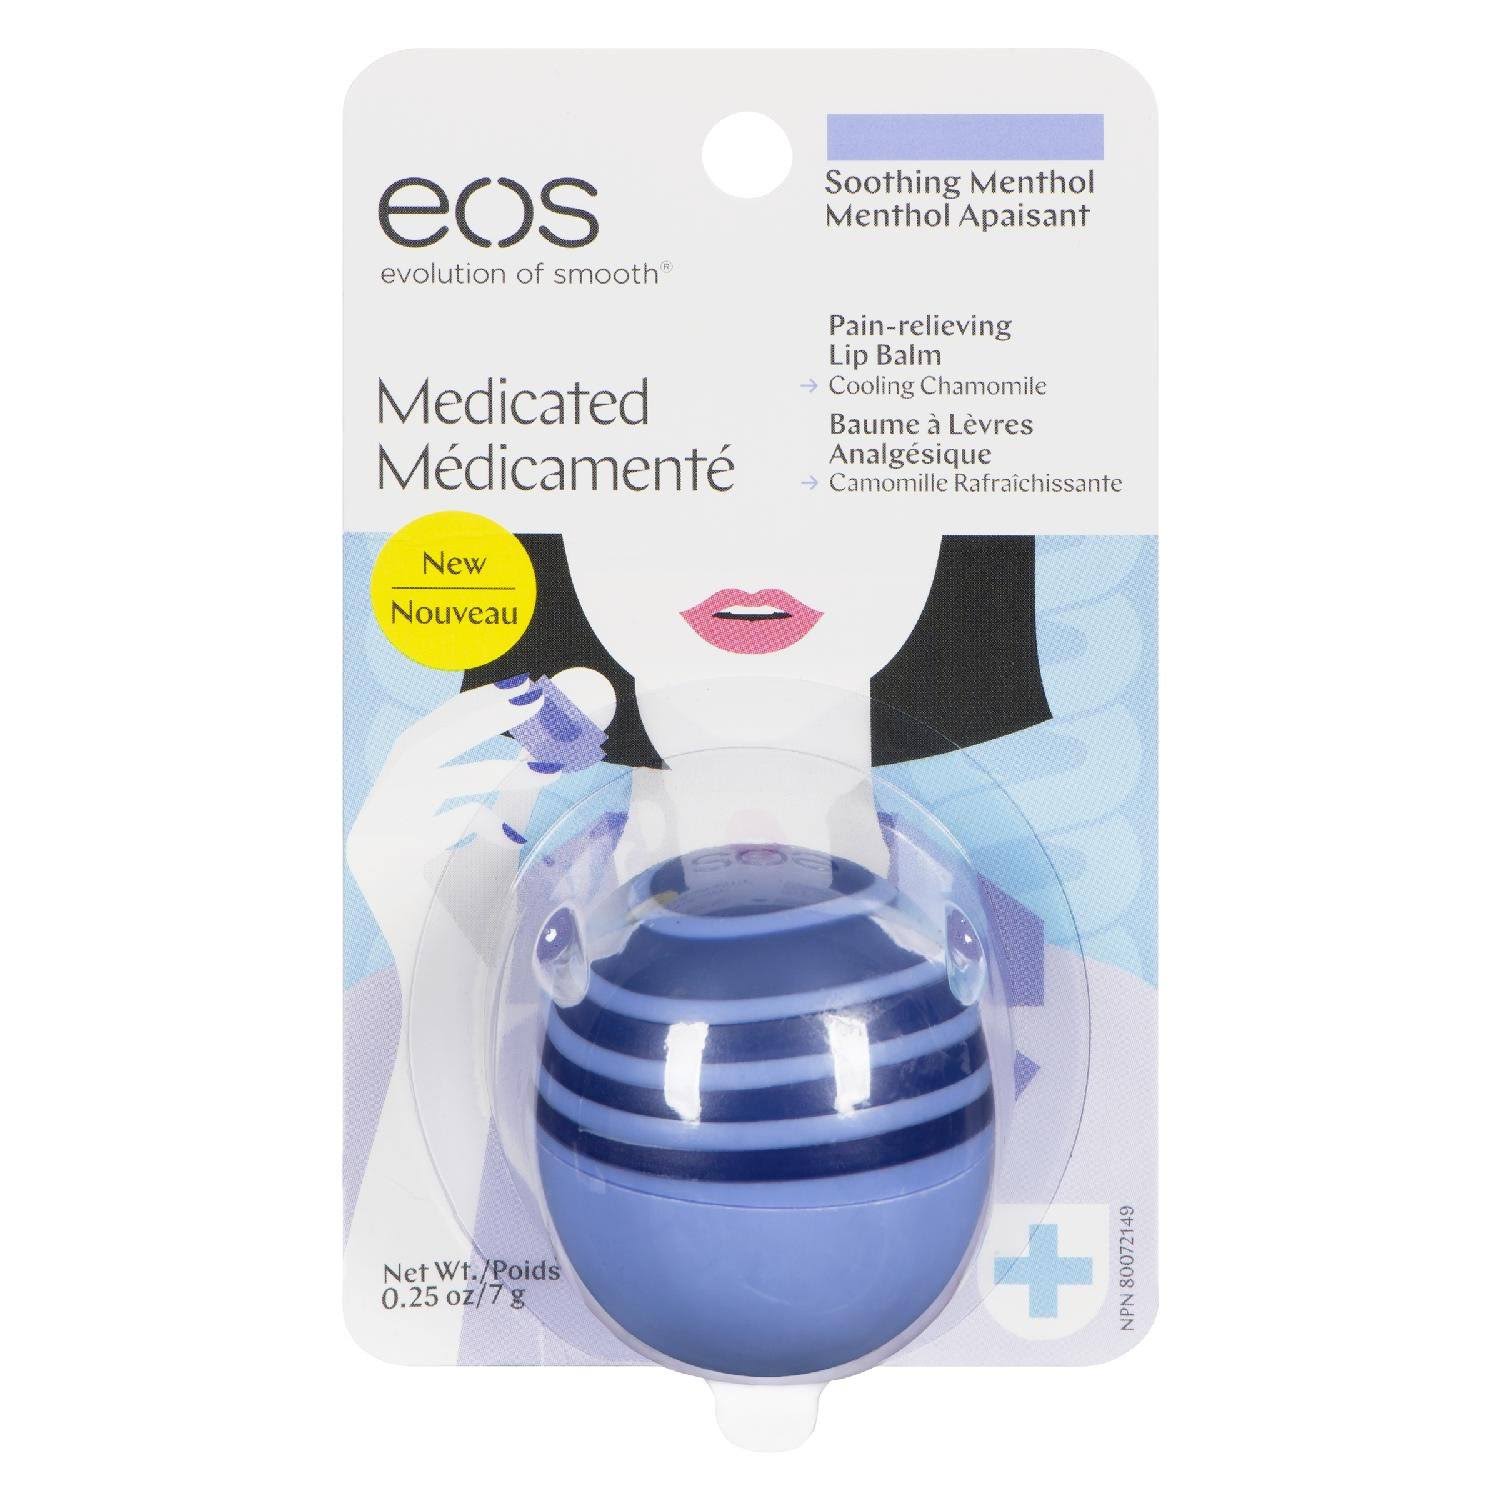 eos Pain Relieving Lip Balm Cooling Chamomile